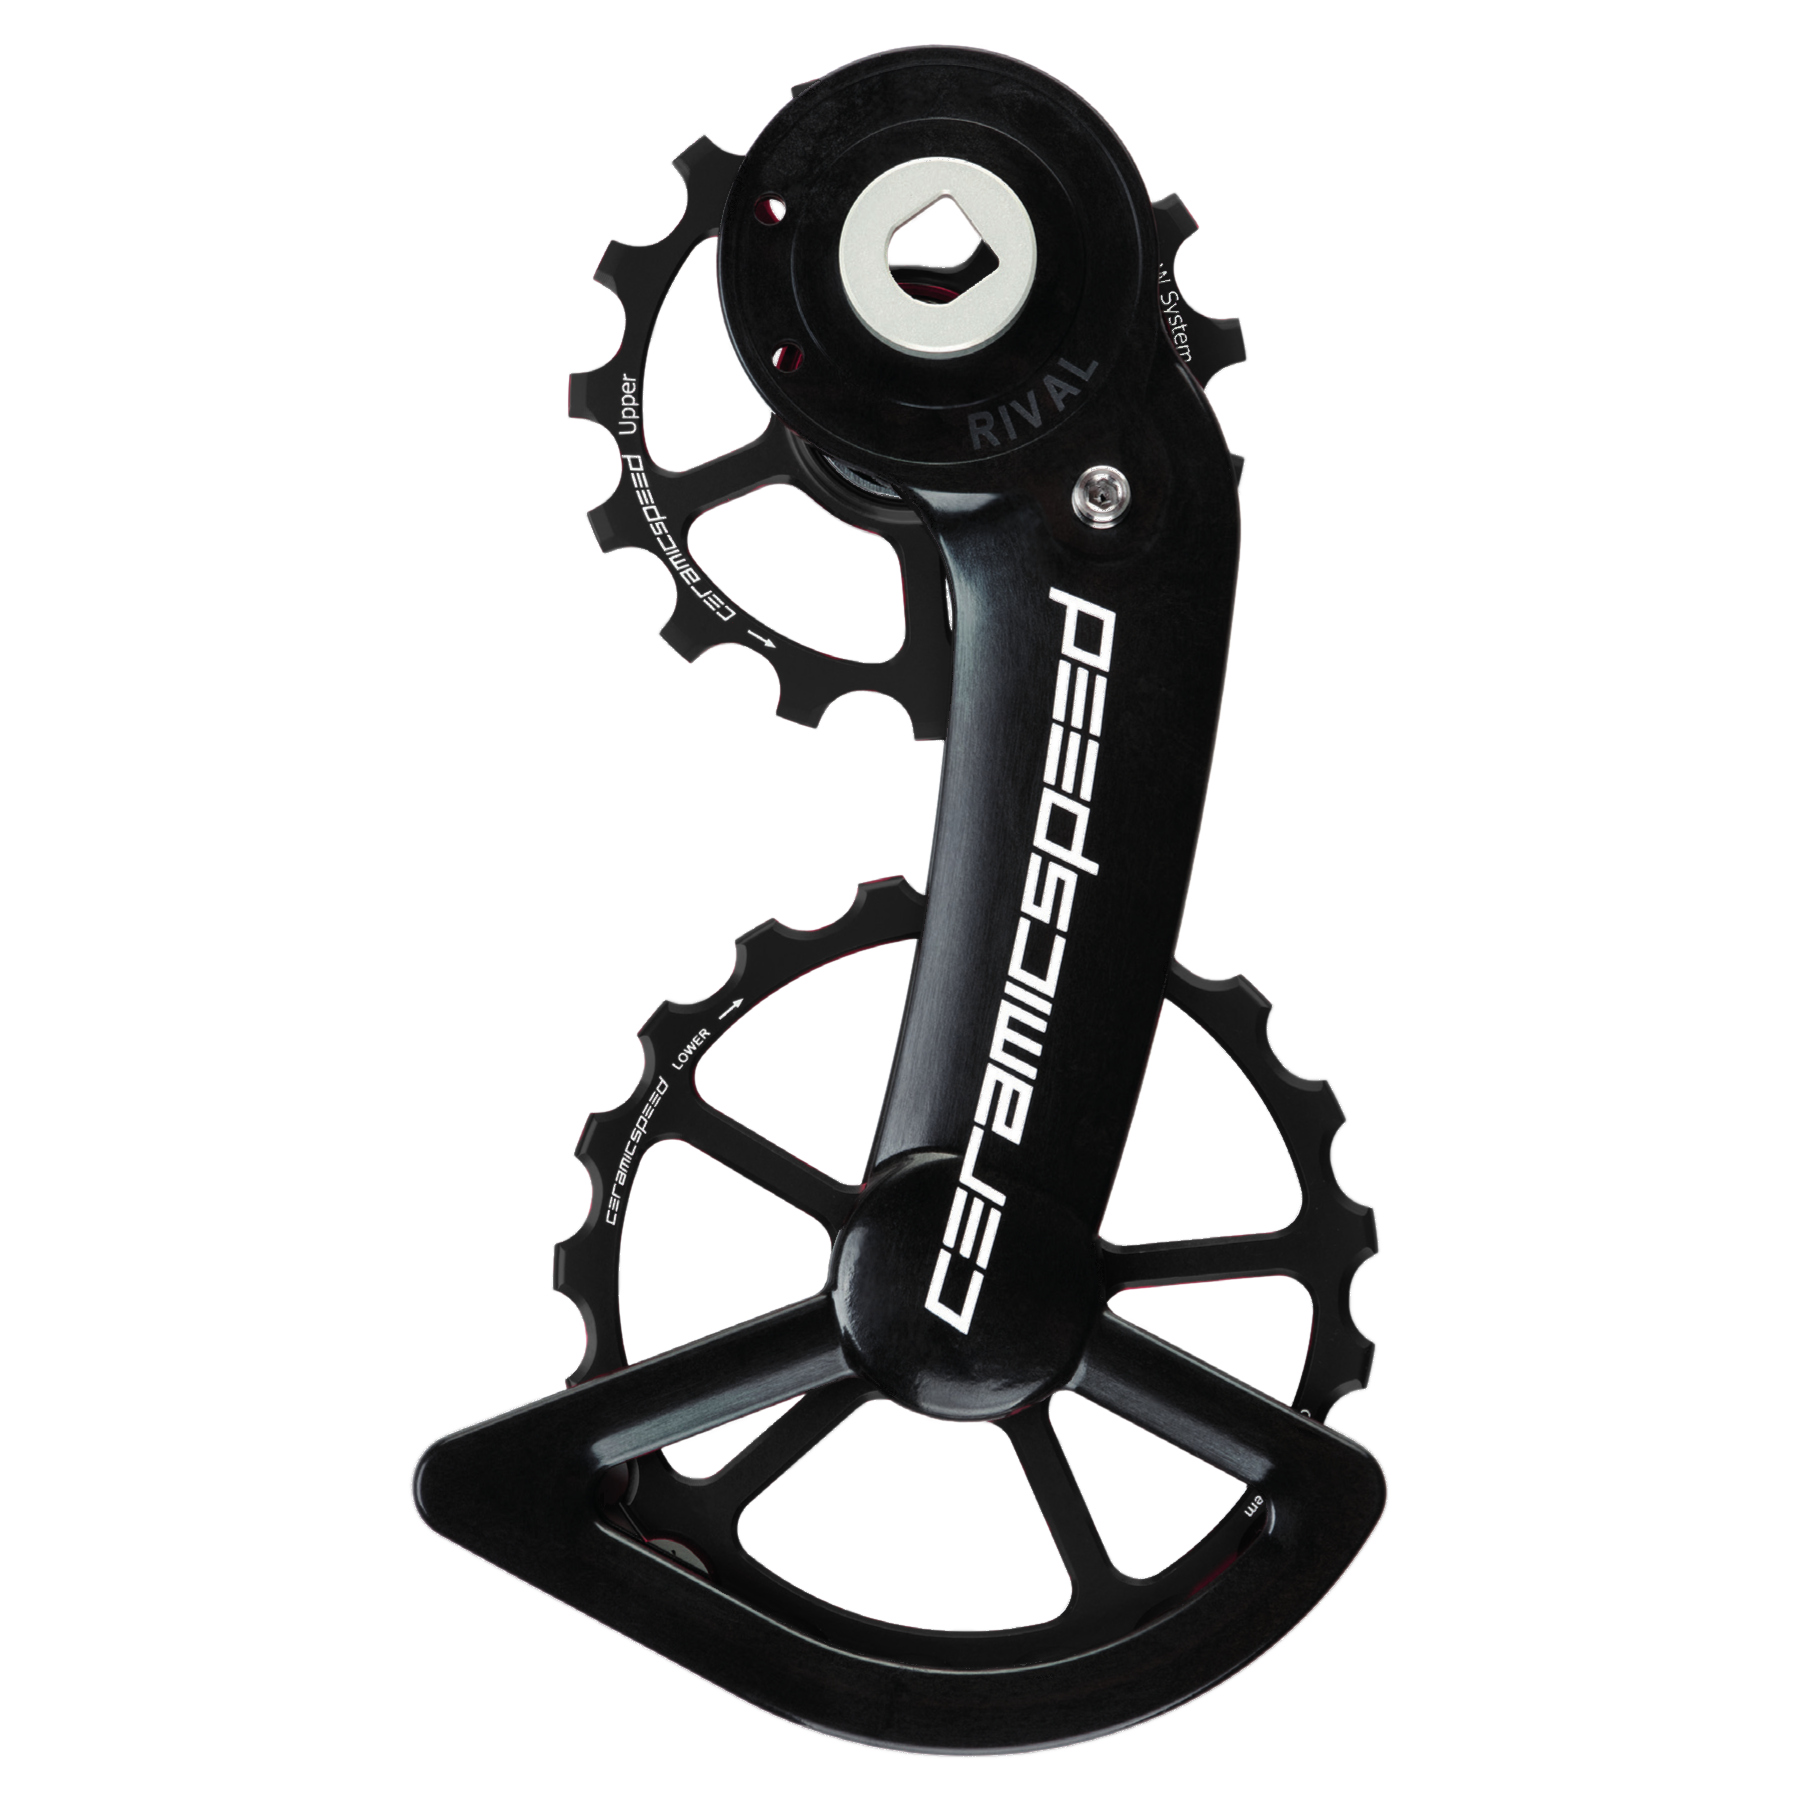 Picture of CeramicSpeed OSPW Derailleur Pulley System - for SRAM Rival AXS | 15/19 Teeth - Alternative Black